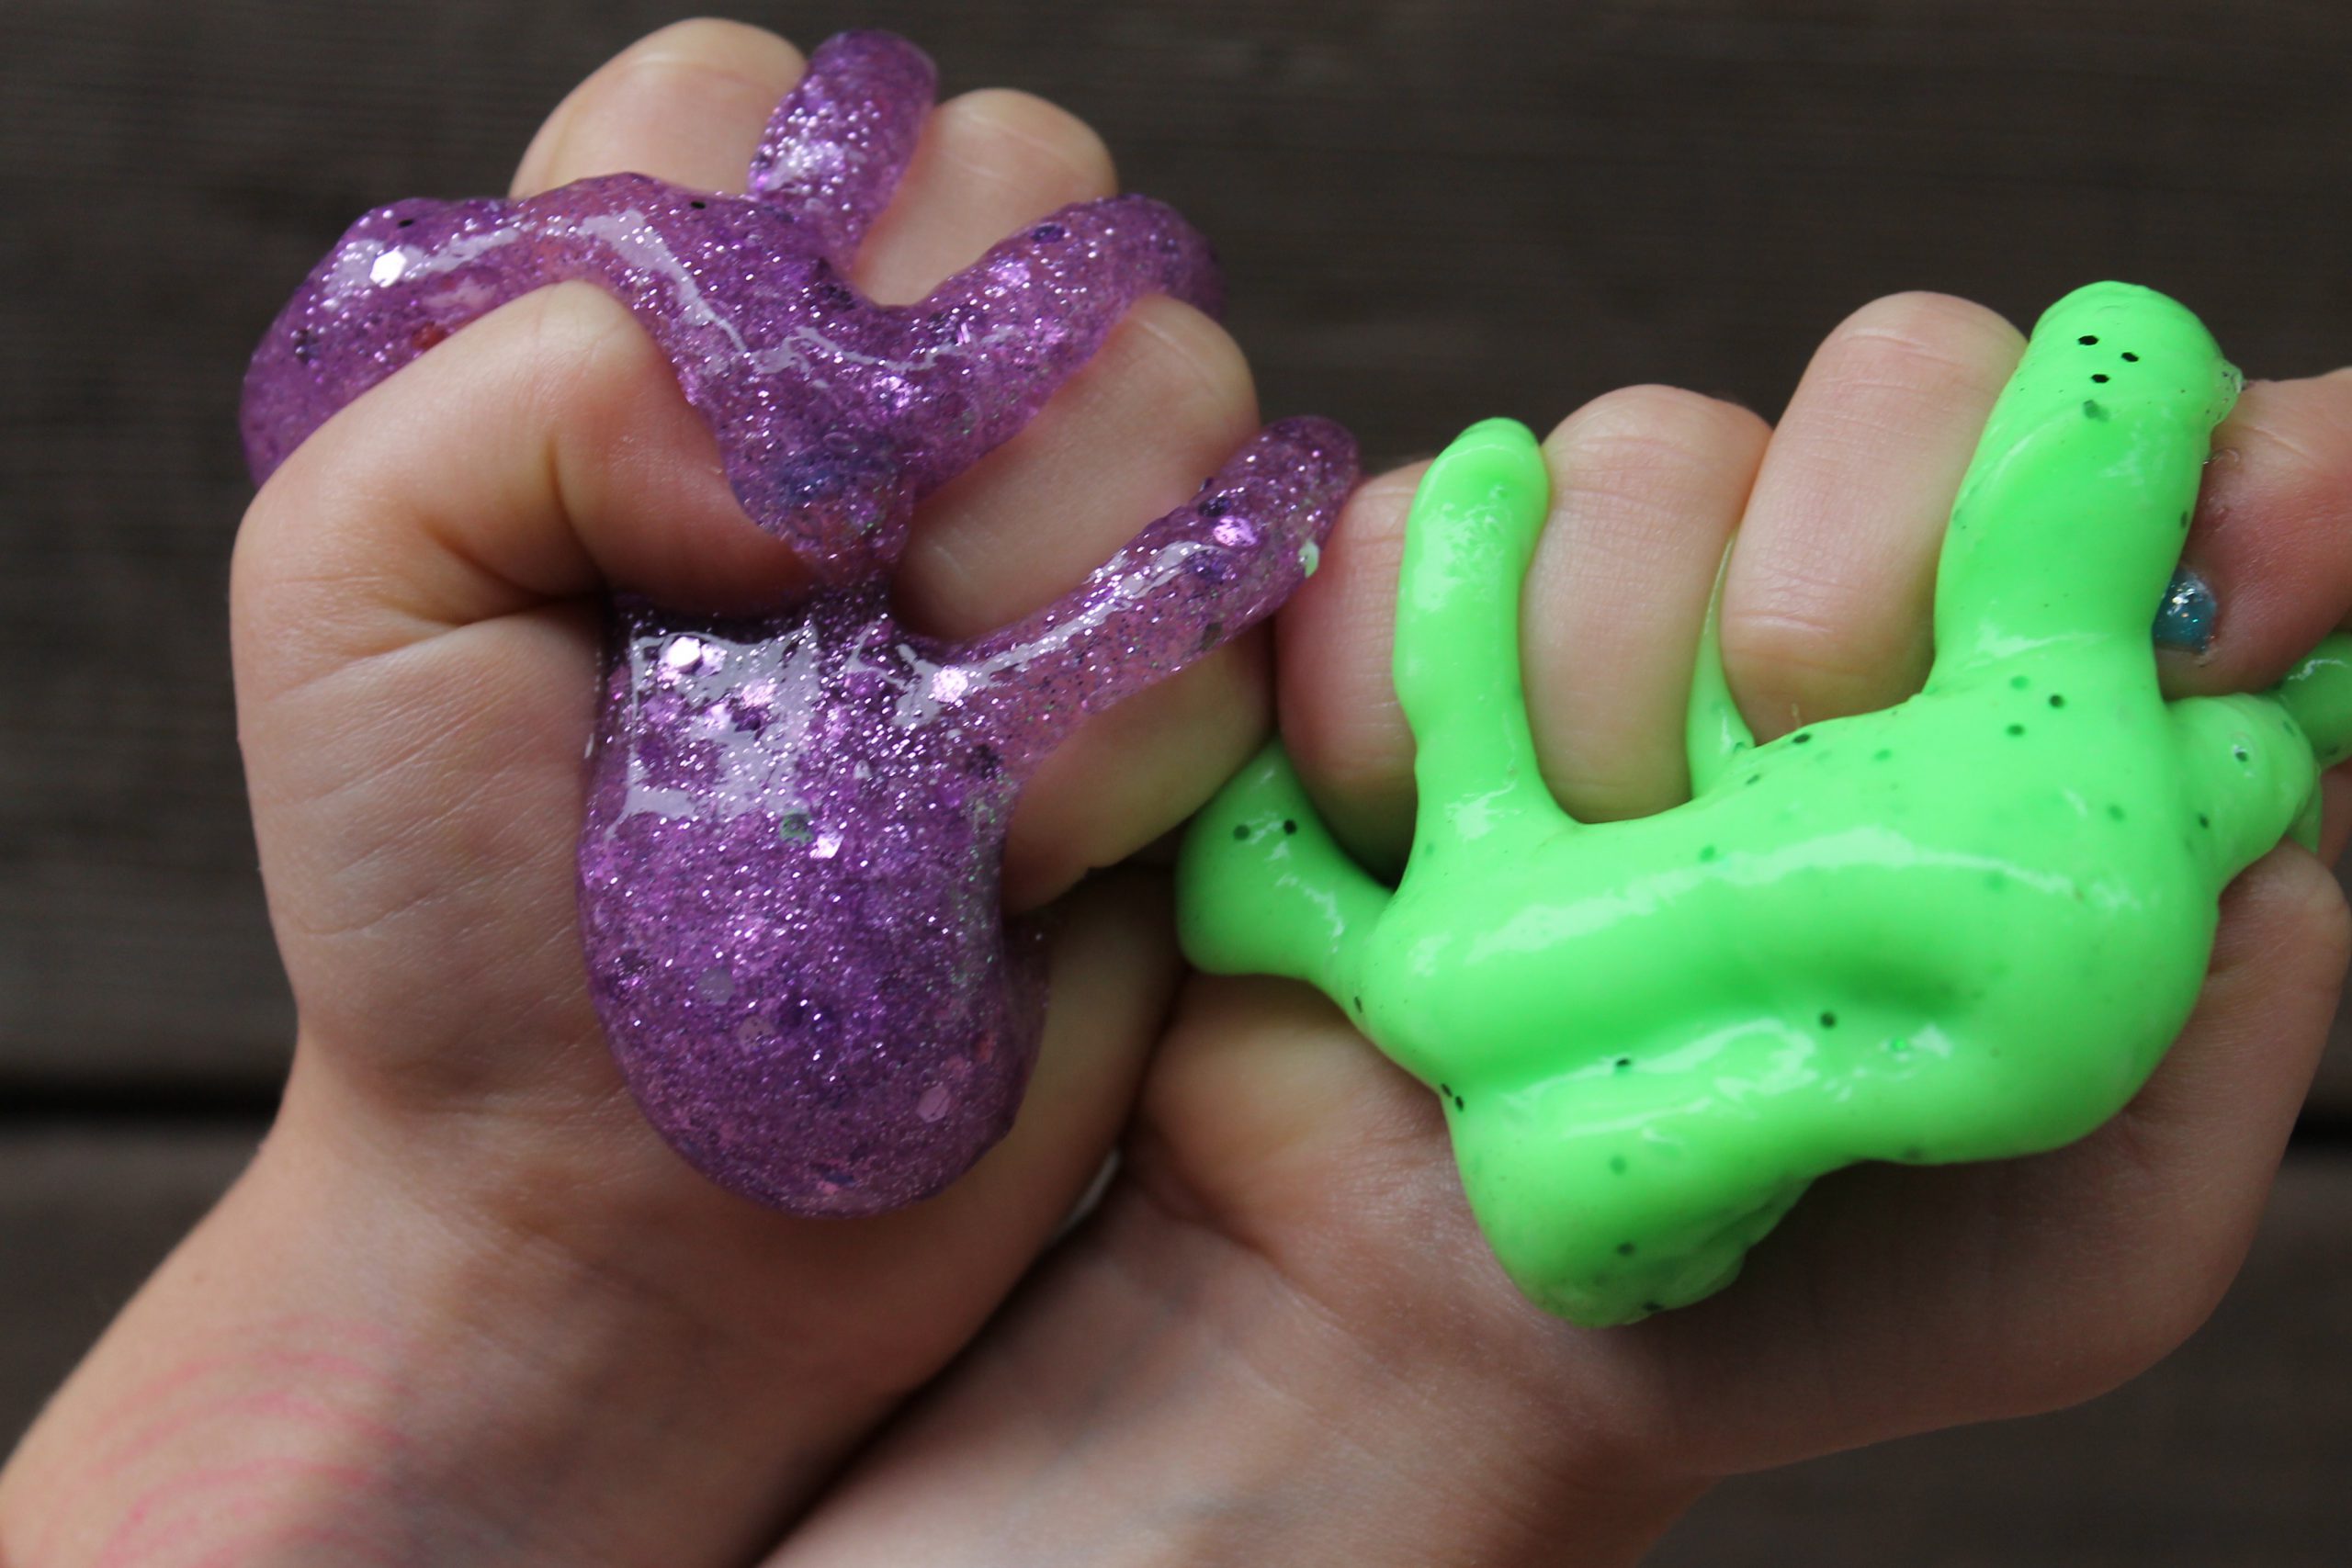 I made DIY Galaxy slime out of Sta-Flo liquid starch, clear Elmers